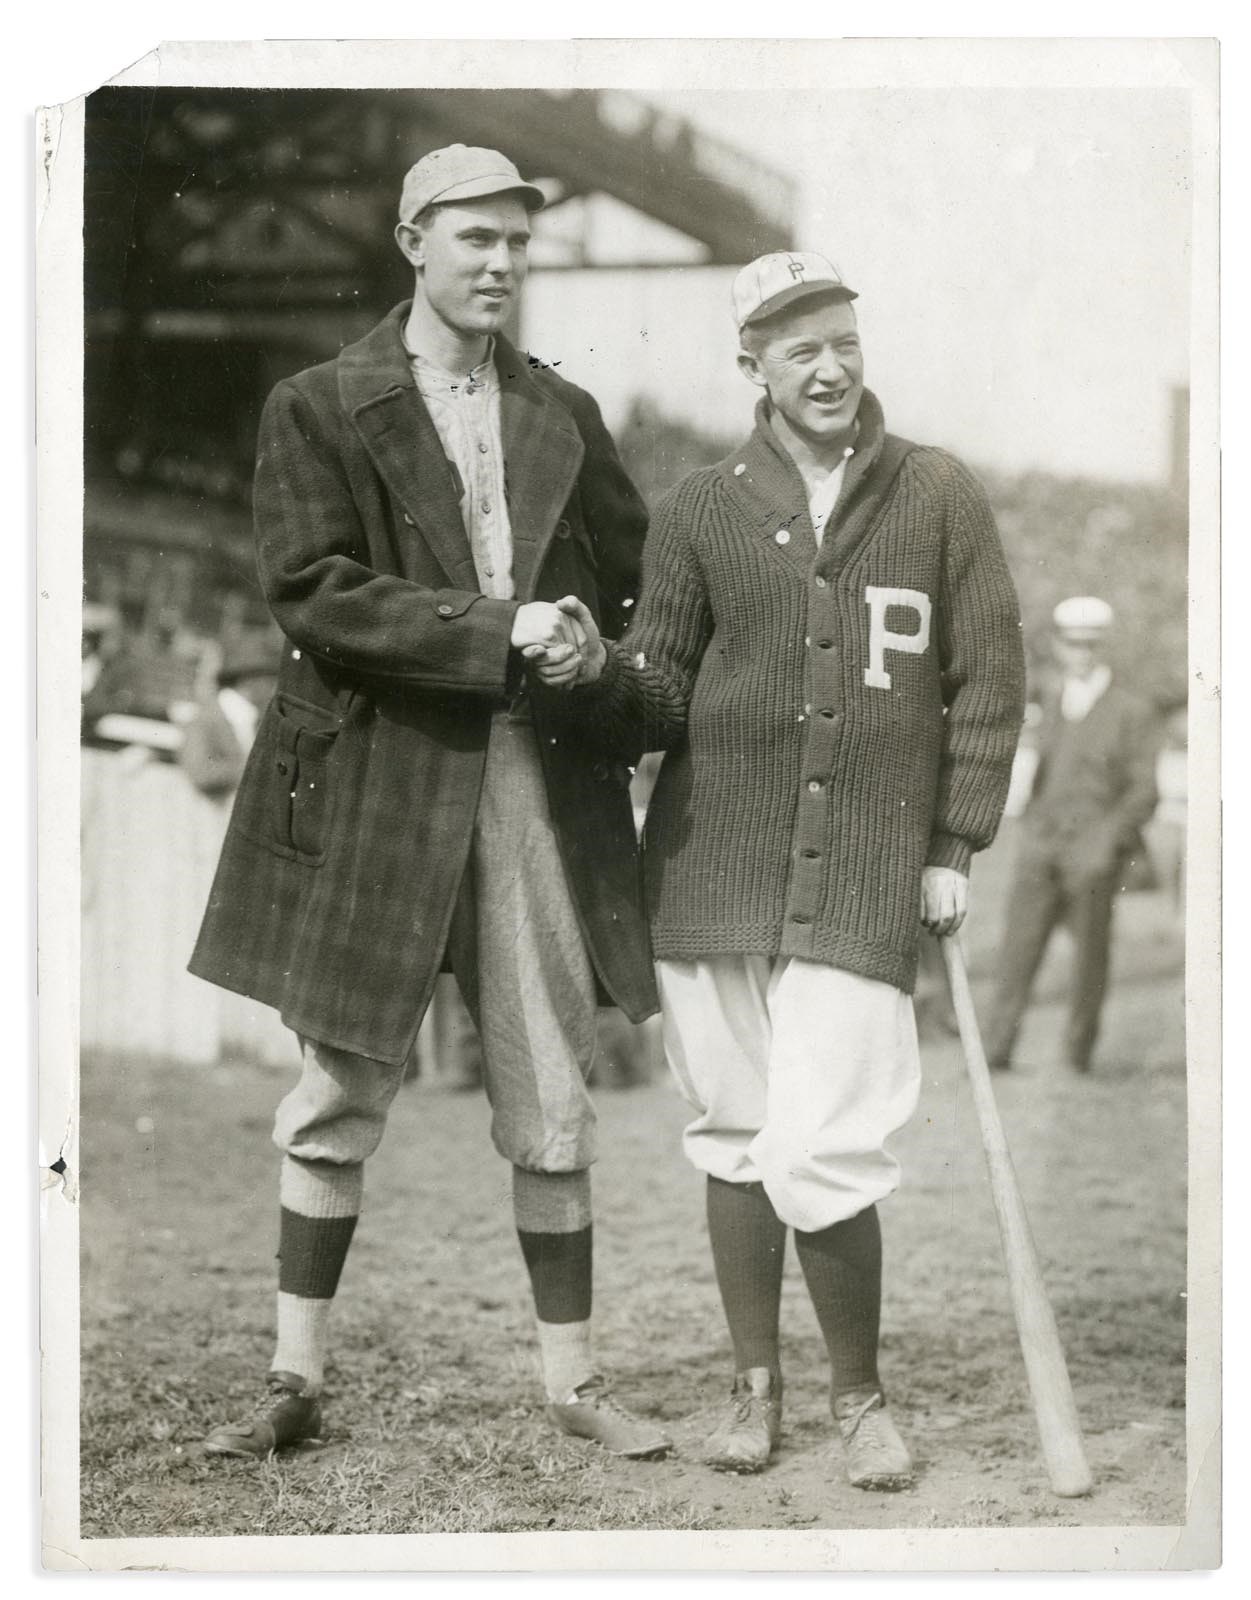 Circa 1910-19 Grover Cleveland Alexander and Eddie Shore, by Paul Thompson